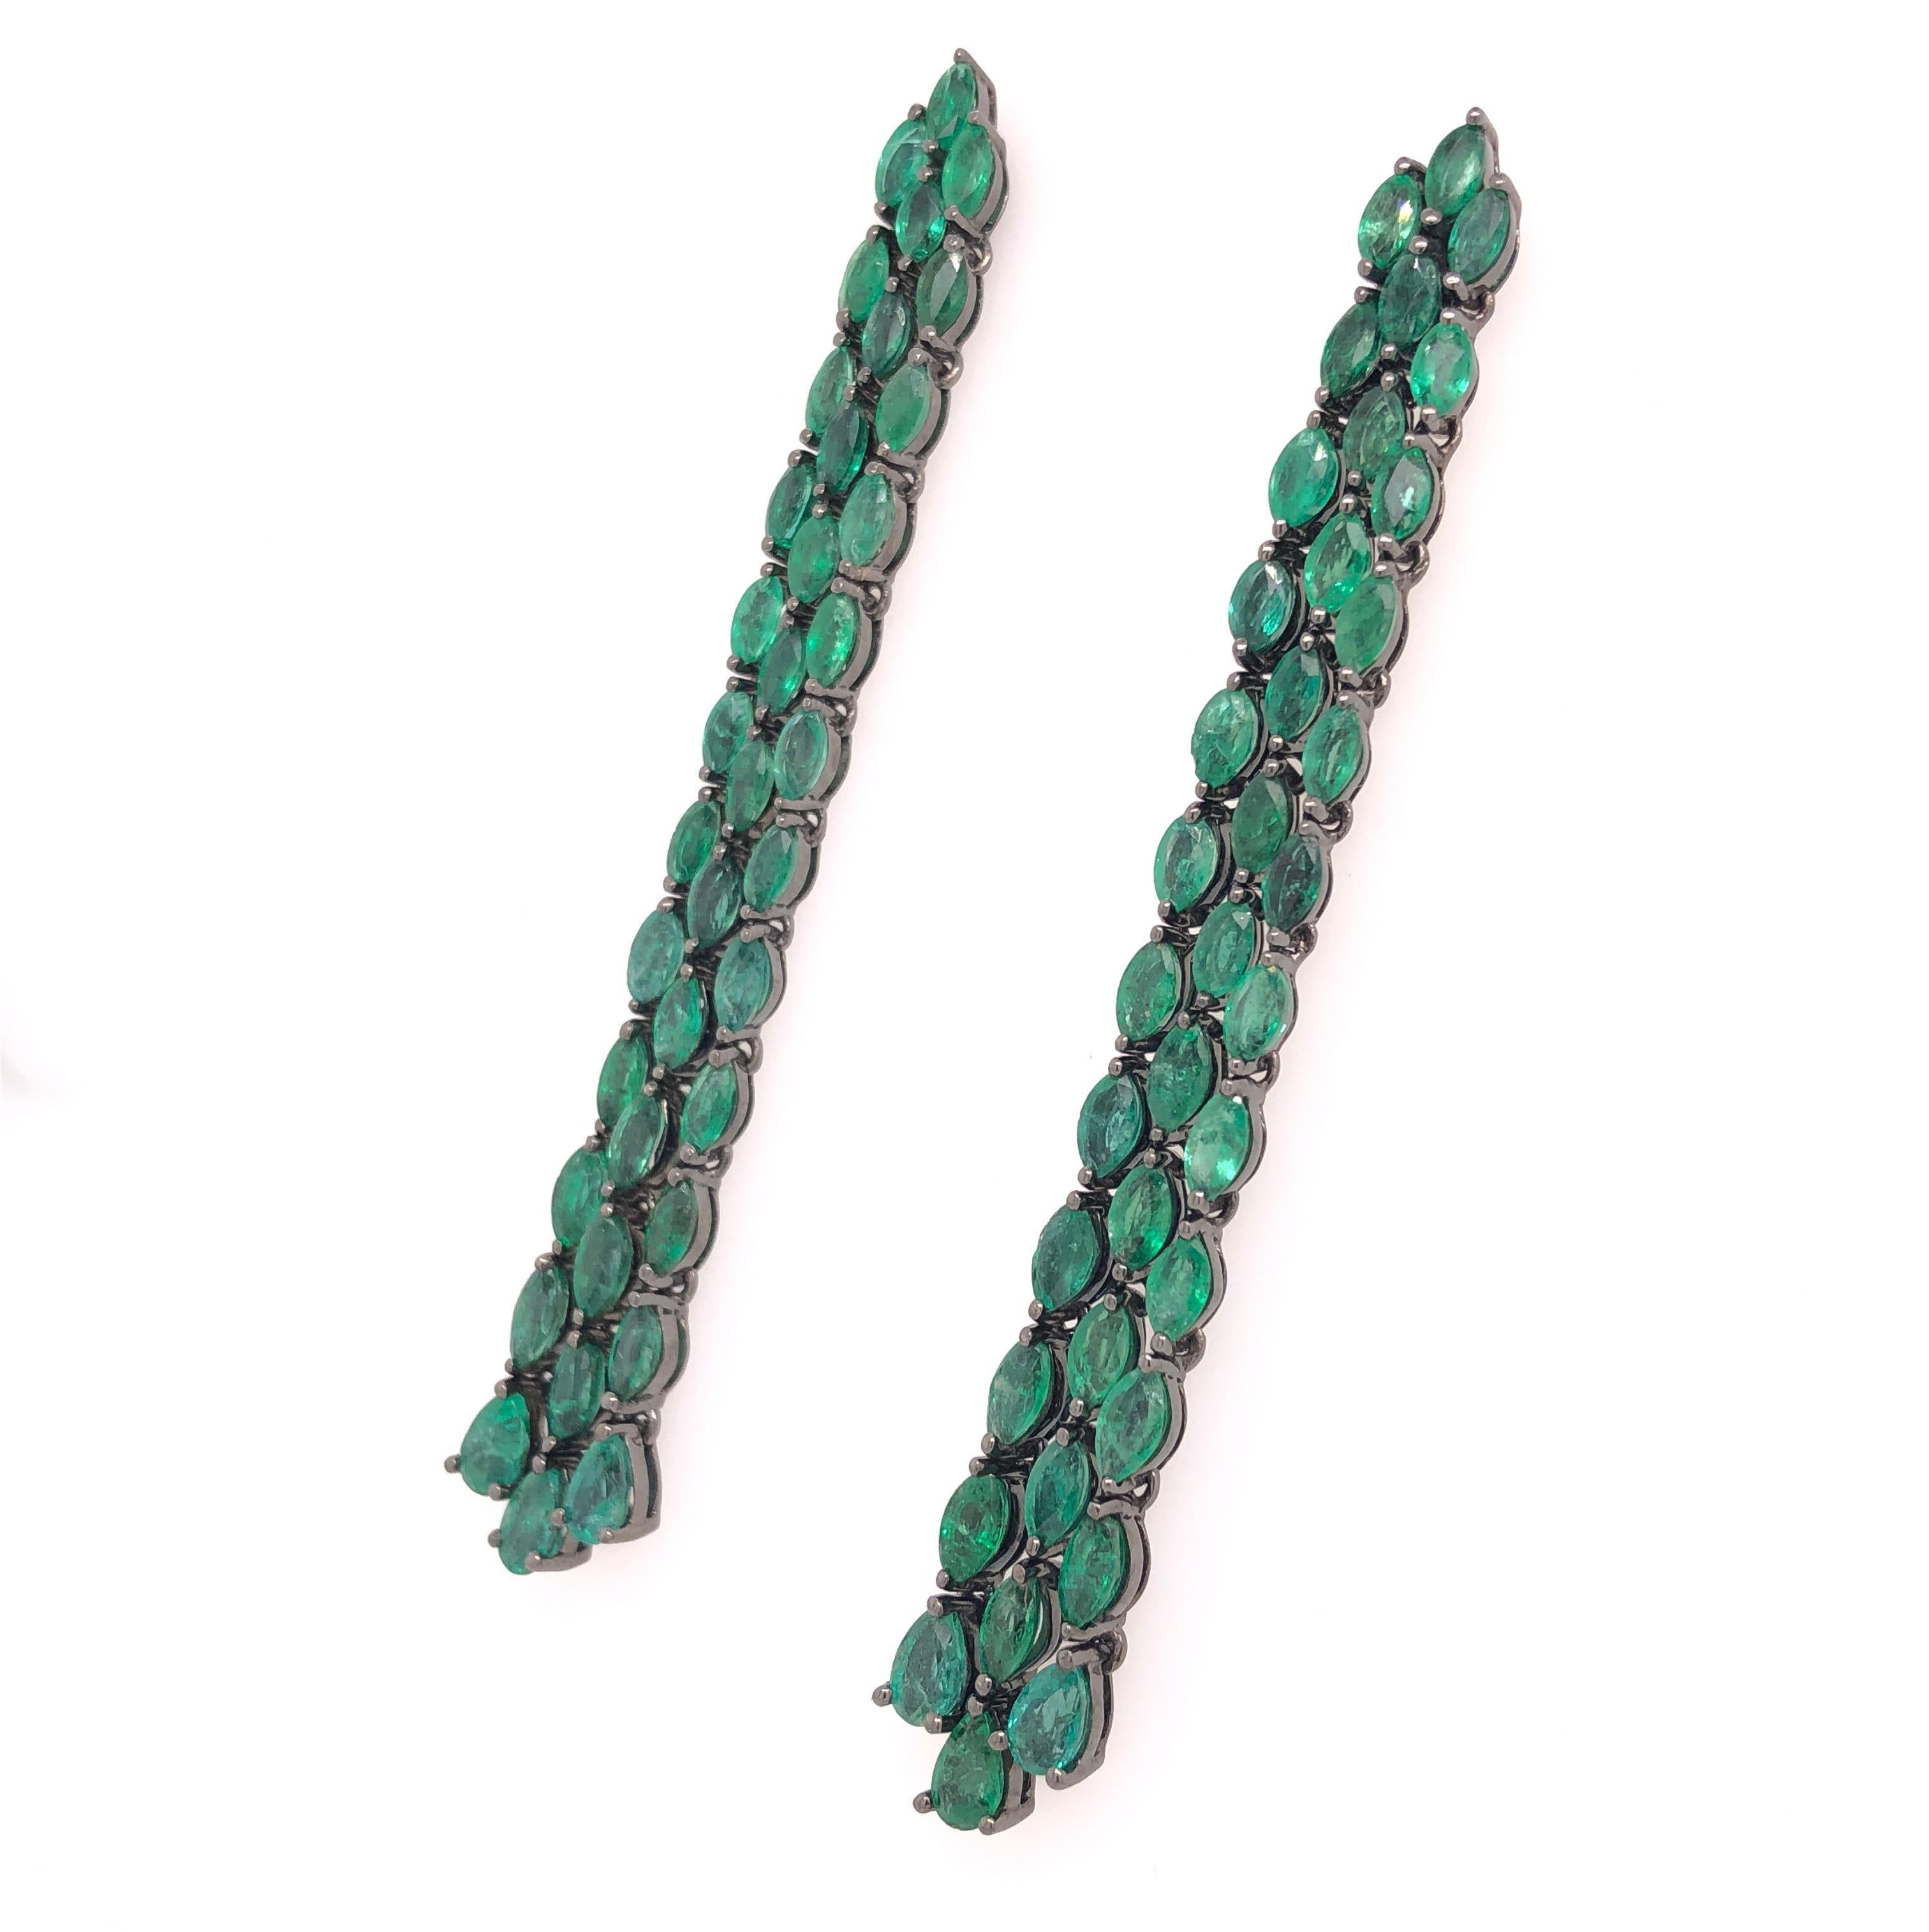 Green Lagoon Collection

Three strand flexible Emerald earrings set in 18K black rhodium gold. The earrings move easily and are lightweight.  

Emerald: 9.41ct total weight.
Height - is approximately 7cm/2.76inches.
Width - is approximately